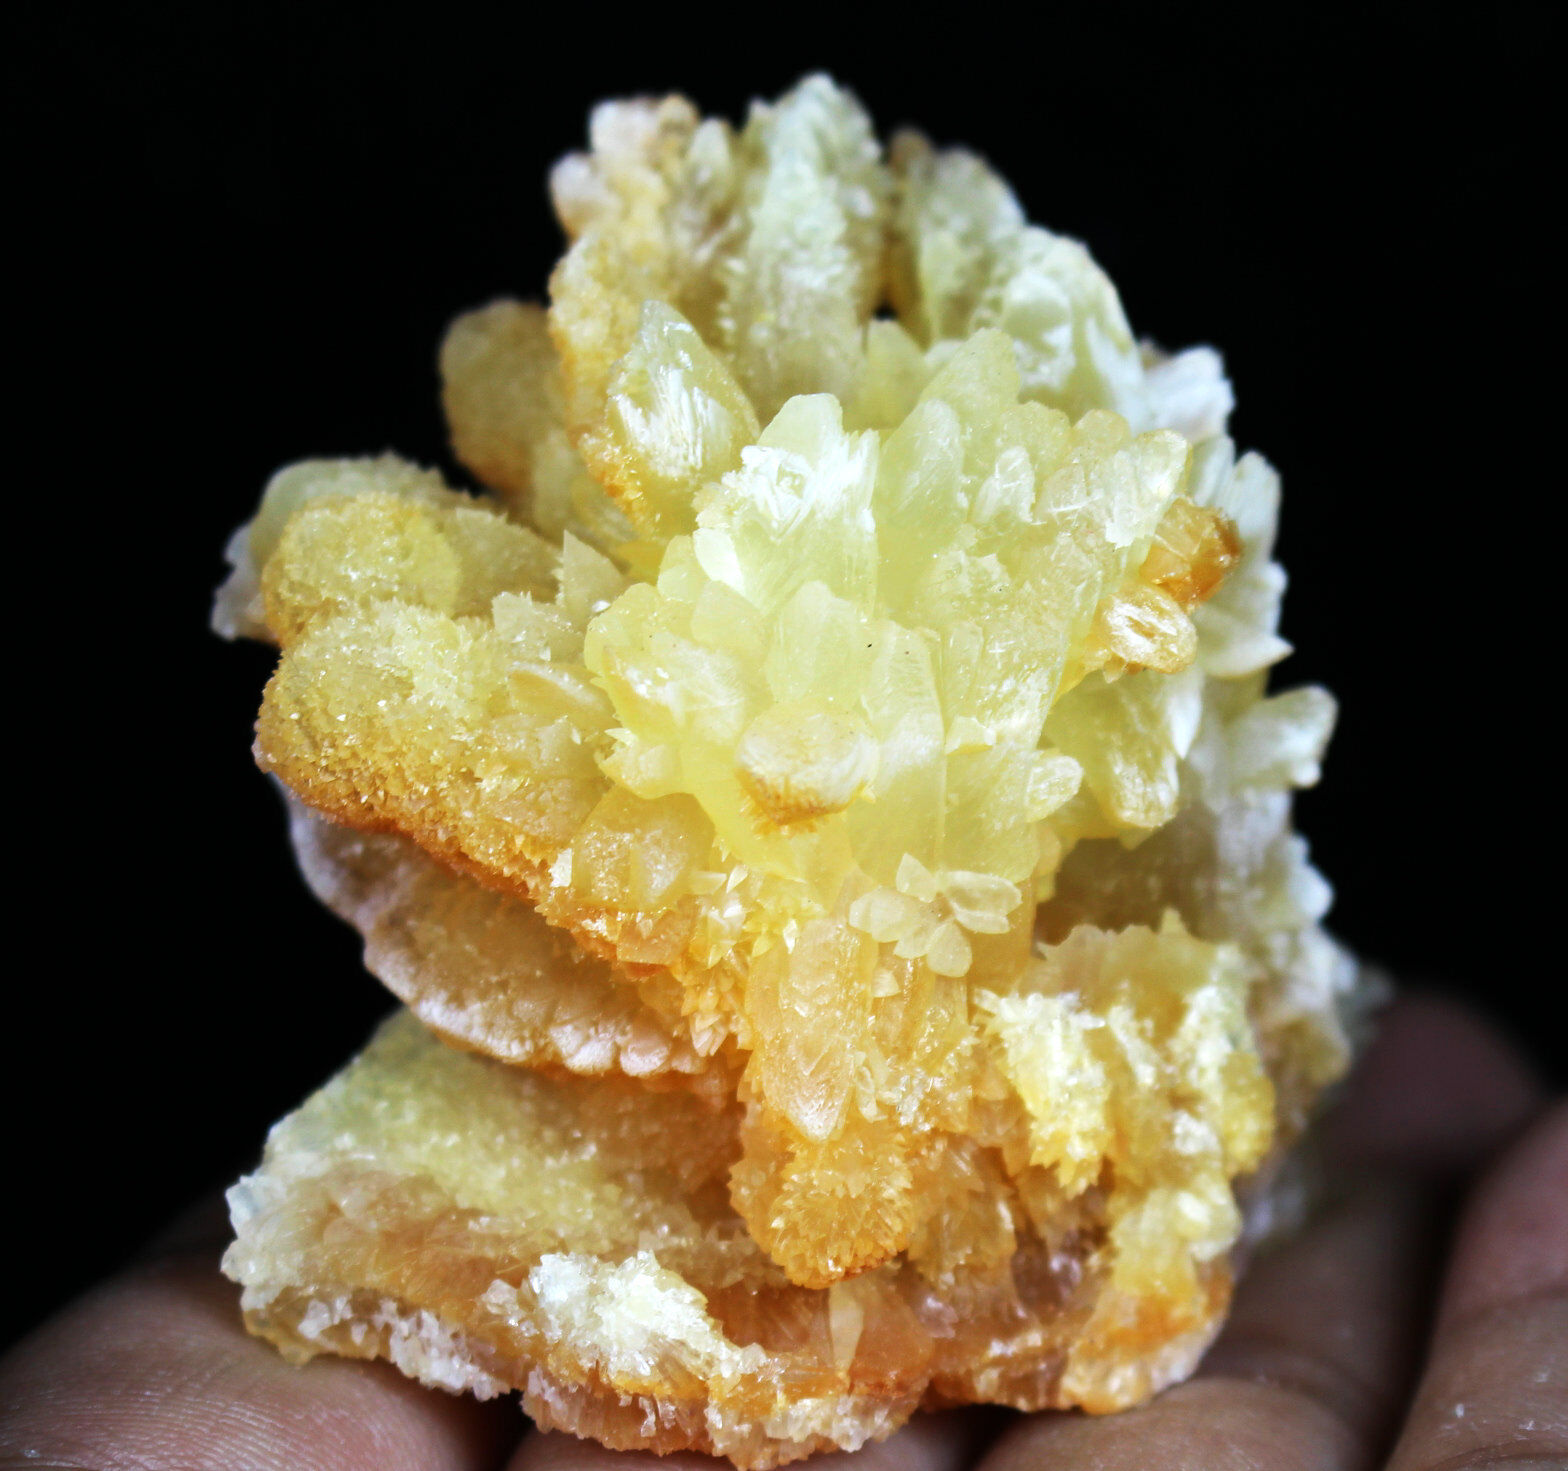 96g Natural Beauty White Crystallization Stone Cluster Mineral Specimens/China